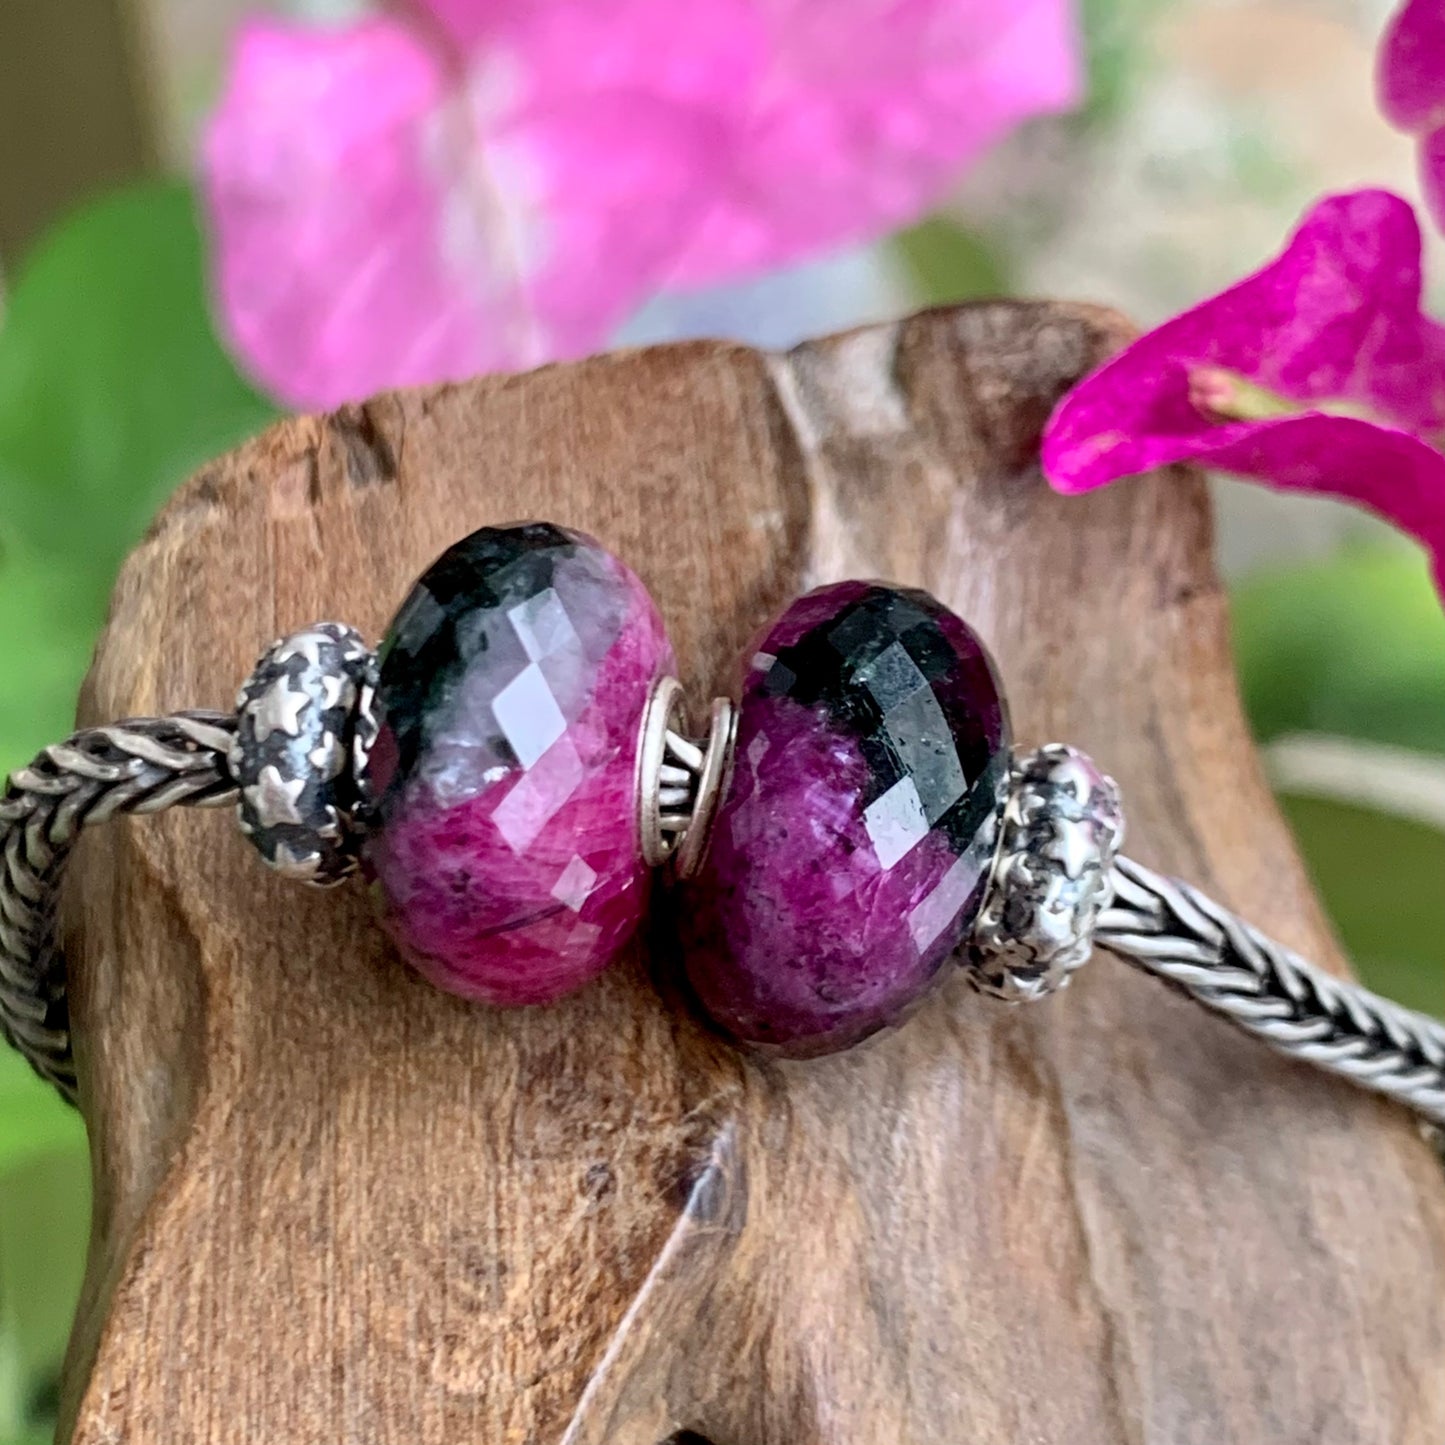 Faceted Ruby and Black Tourmaline Beads Fit European Trollbeads Bracelets and Some of the Pandora Bangles